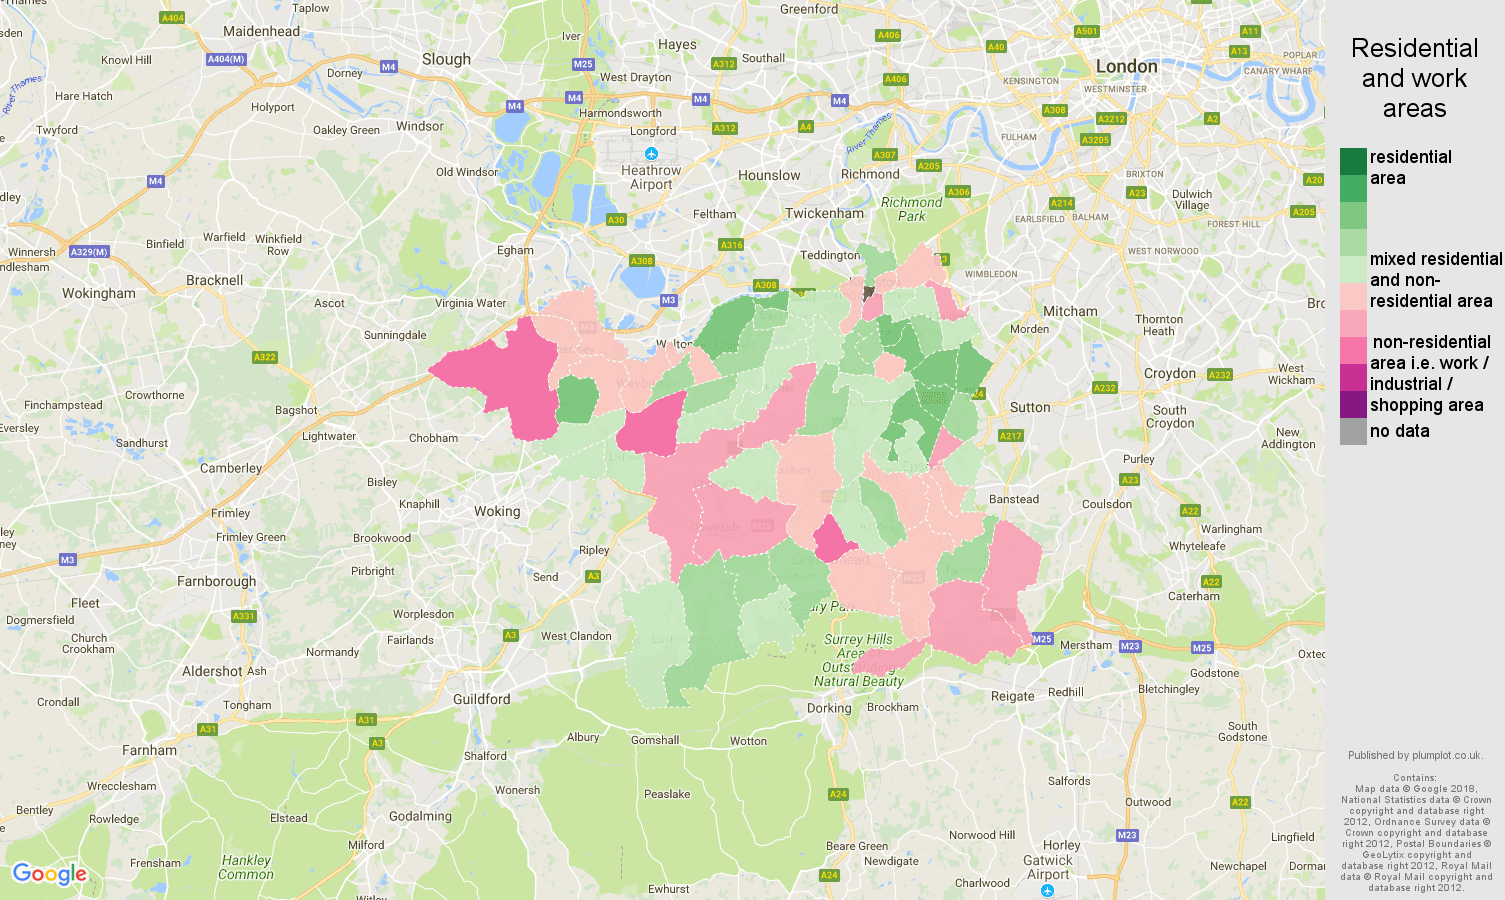 Kingston upon Thames residential areas map